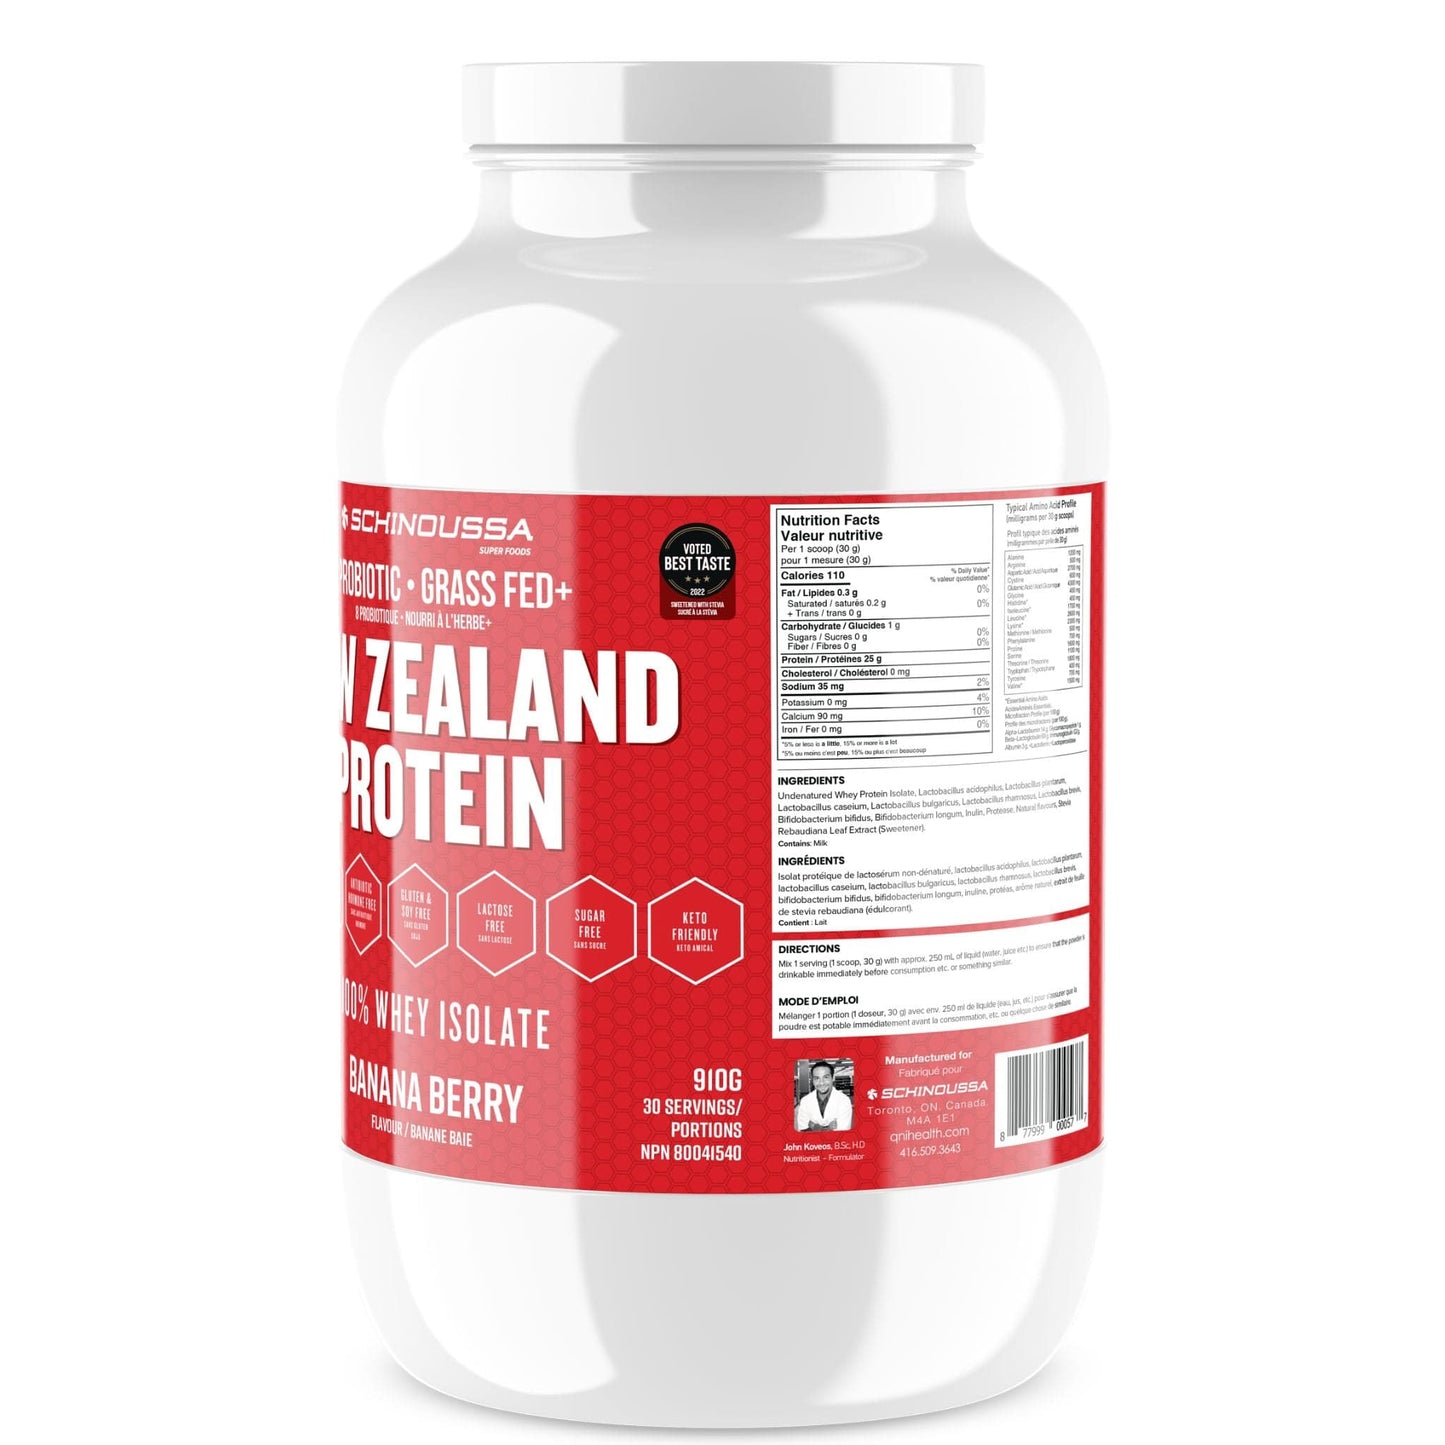 Banana Berry | Schinoussa New Zealand Protein 8 Probiotic 100% Whey Isolate Nutrition Label // Banana Berry flavour